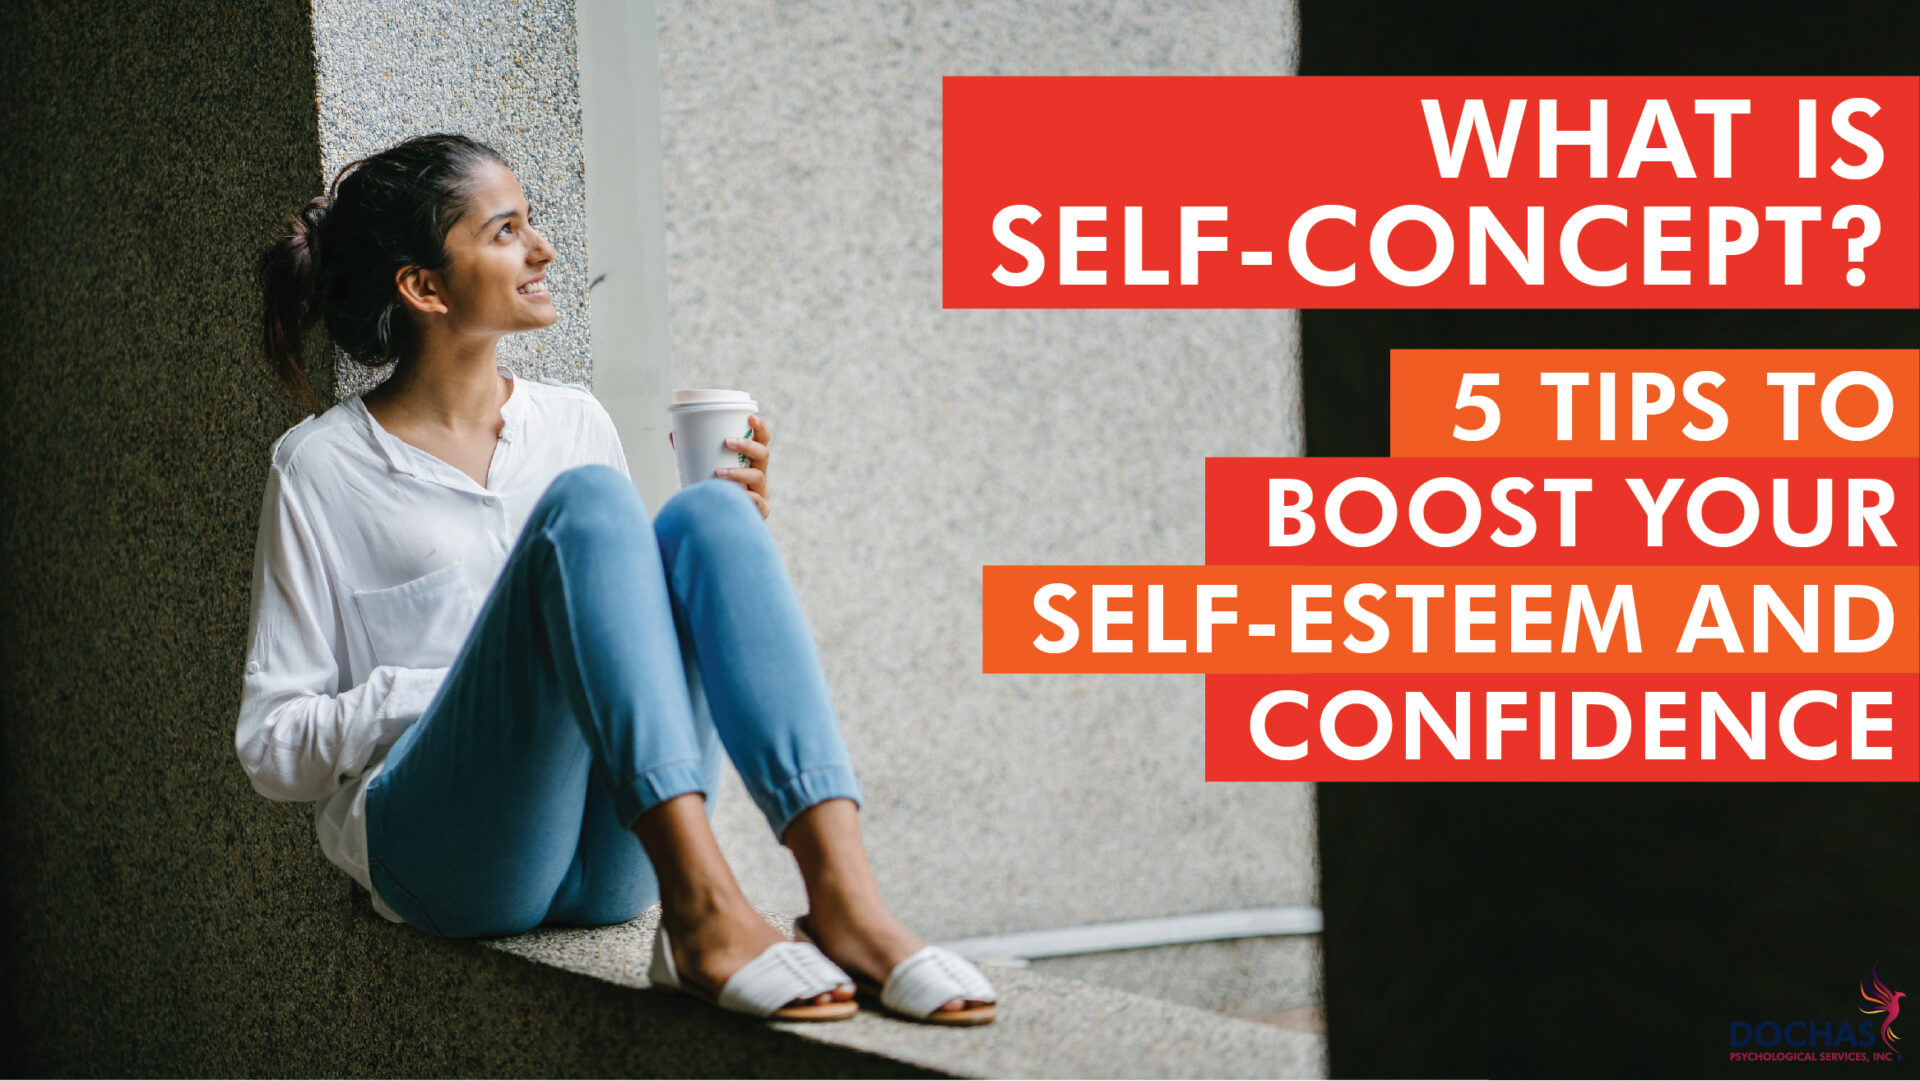 What Is Self-Concept? 5 Tips to Boost Your Self-Esteem and